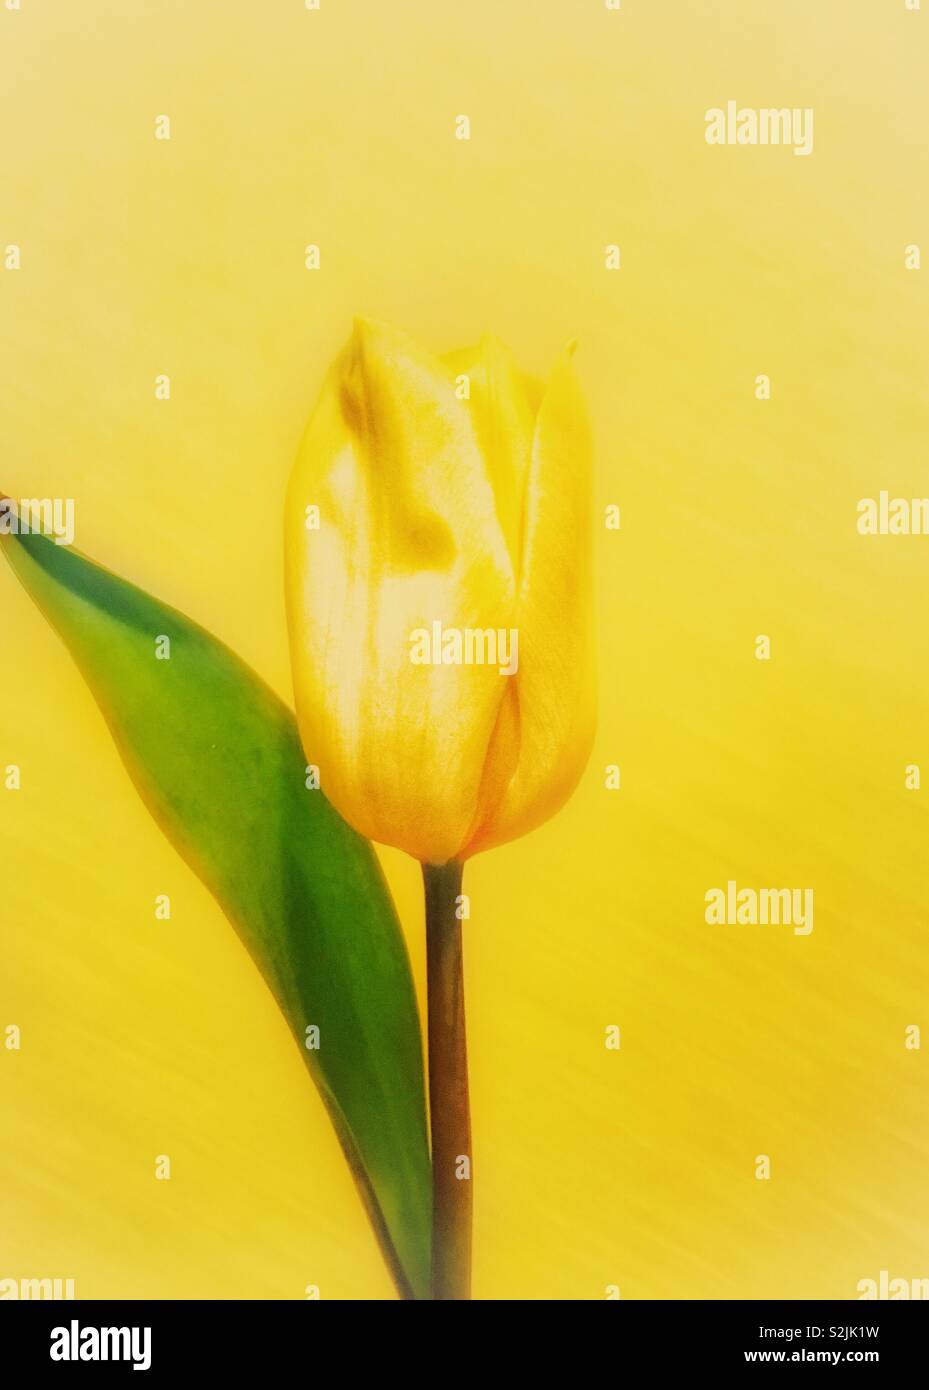 Yellow tulip and green leaf against textured yellow background Stock Photo